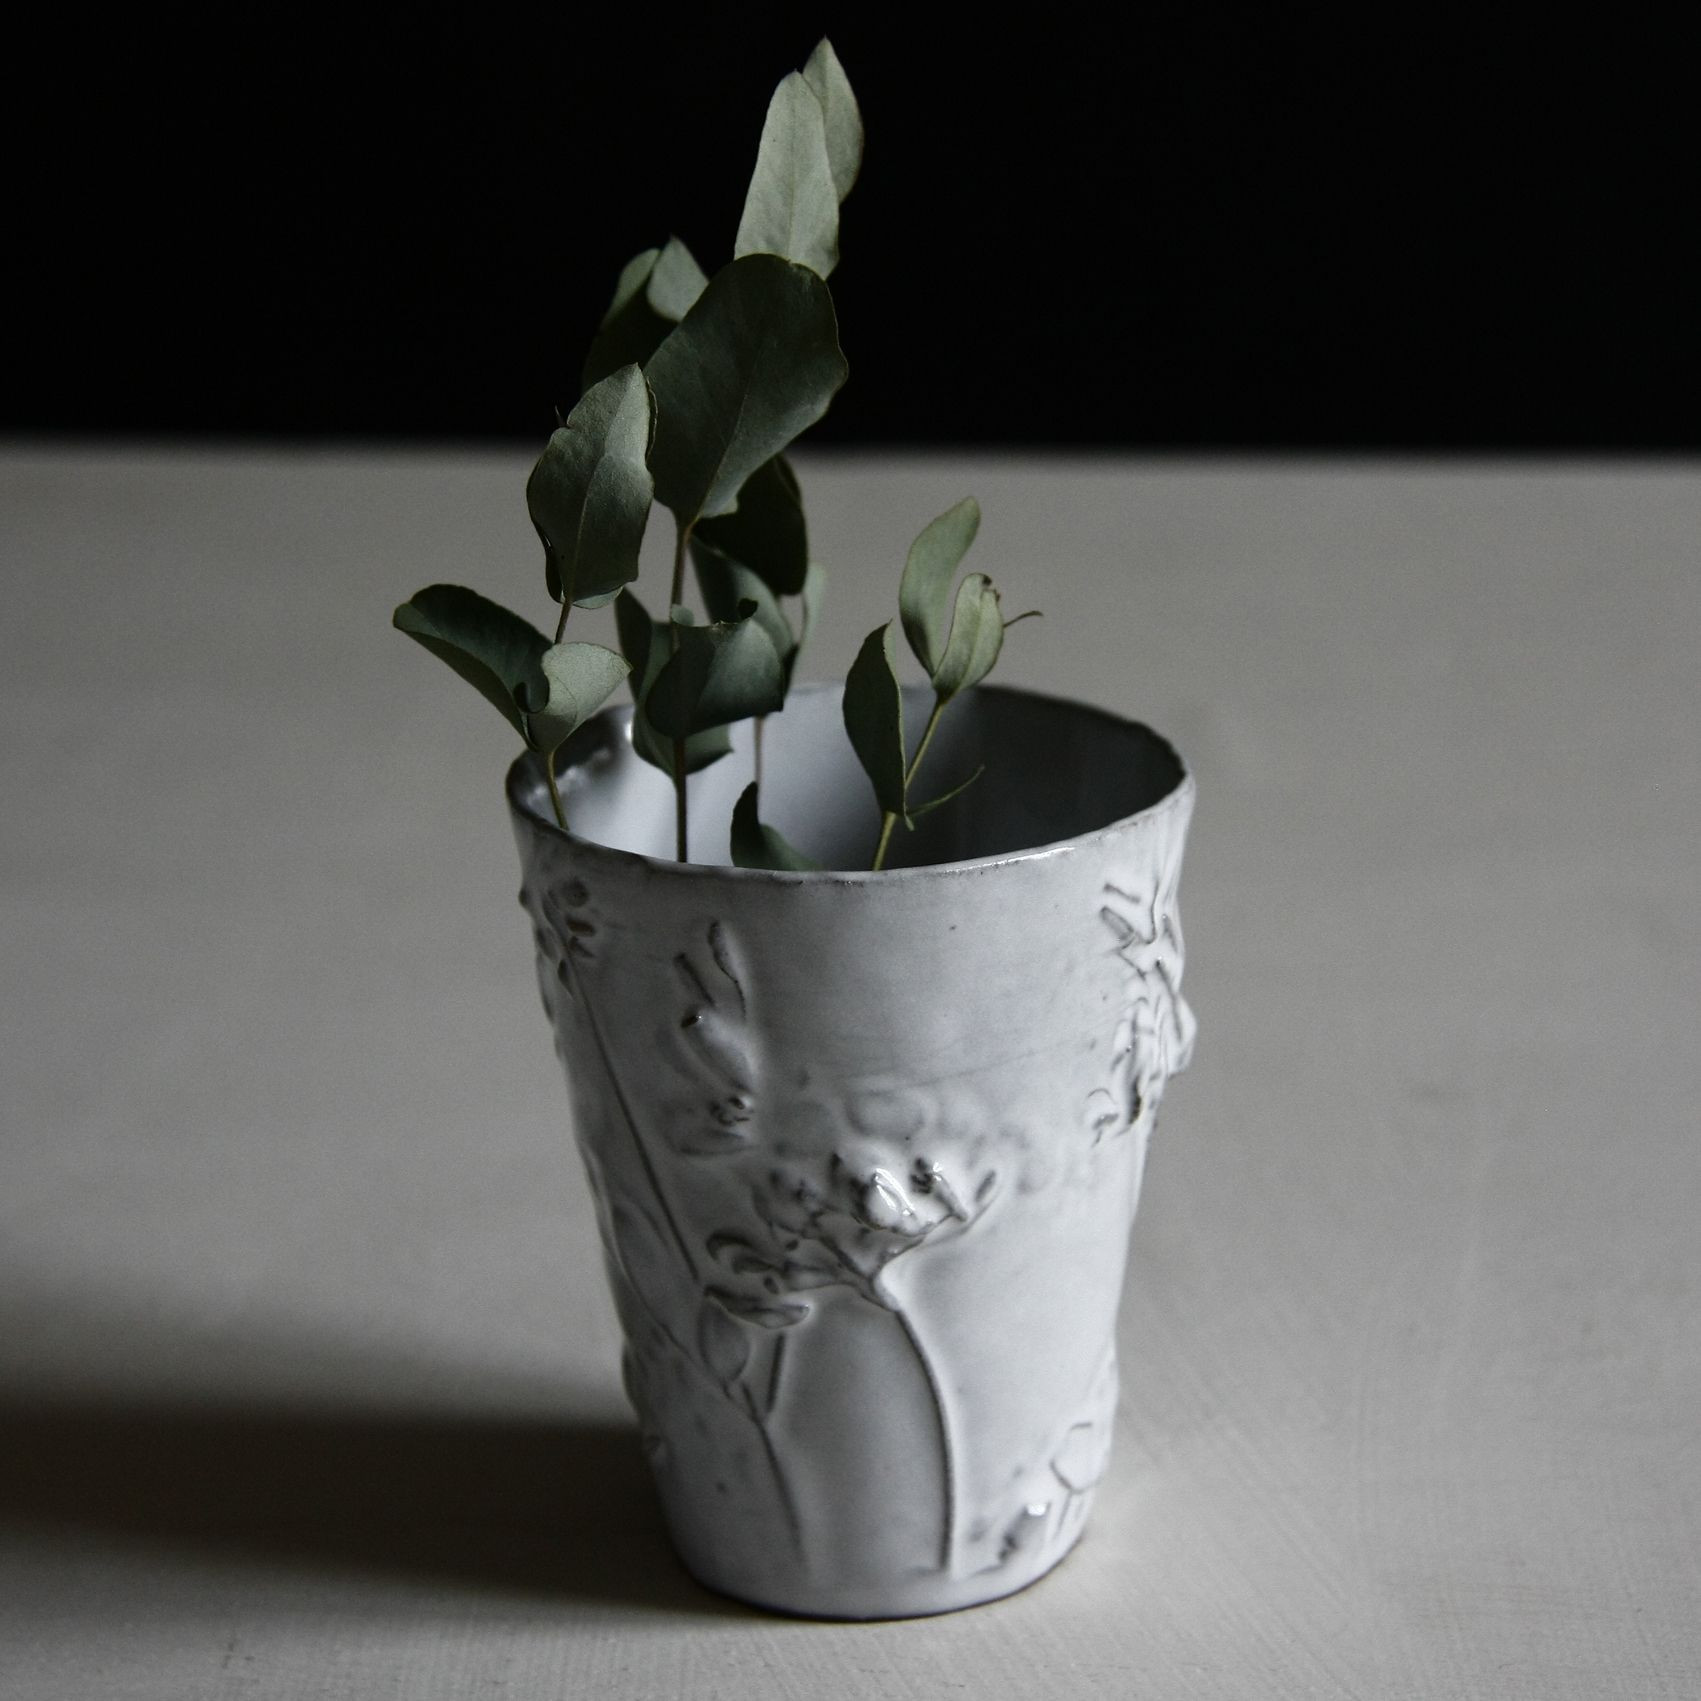 25 Lovely Eucalyptus Plant In Vase 2024 free download eucalyptus plant in vase of rustic chic beaker small with eucalyptus beautyoflittlethings in rustic chic beaker small with eucalyptus beautyoflittlethings